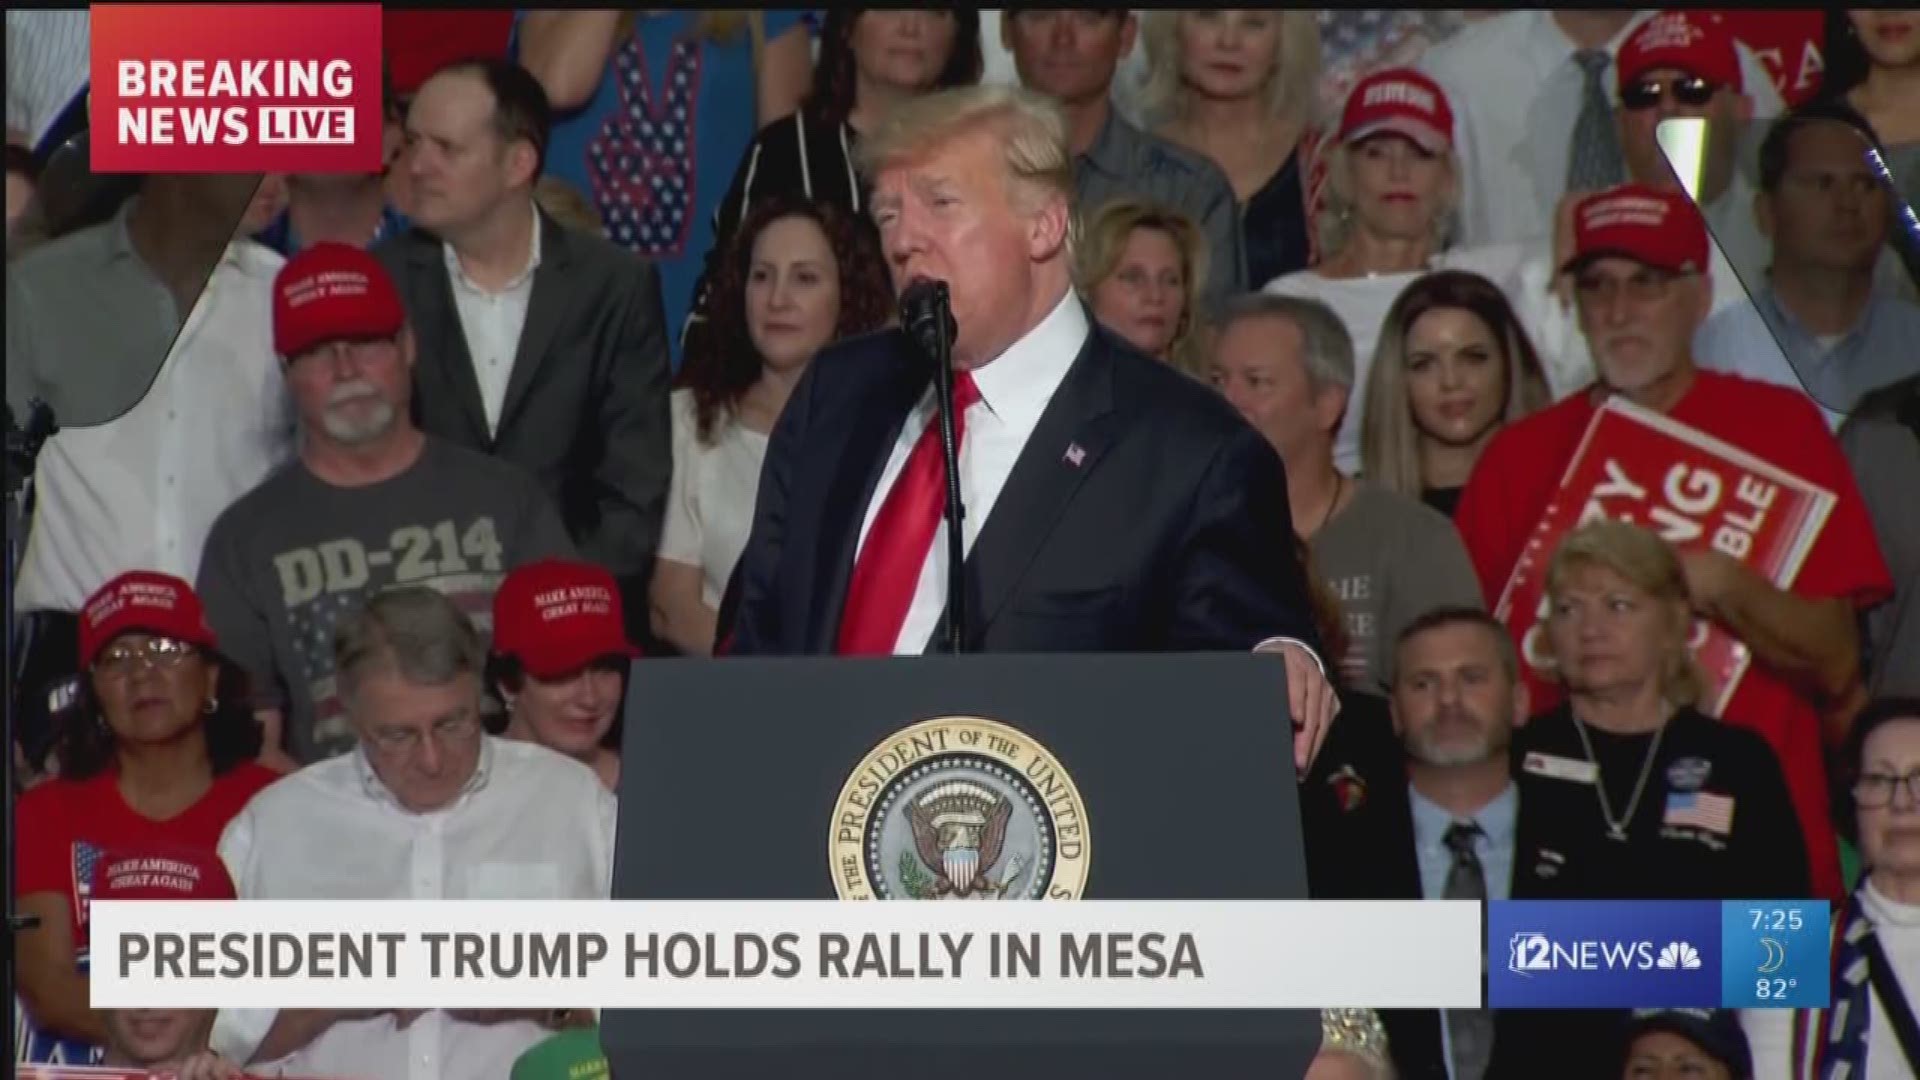 President Trump talked about open borders while laying out why voters should vote Republican and "yes" for Senate candidate Martha McSally.